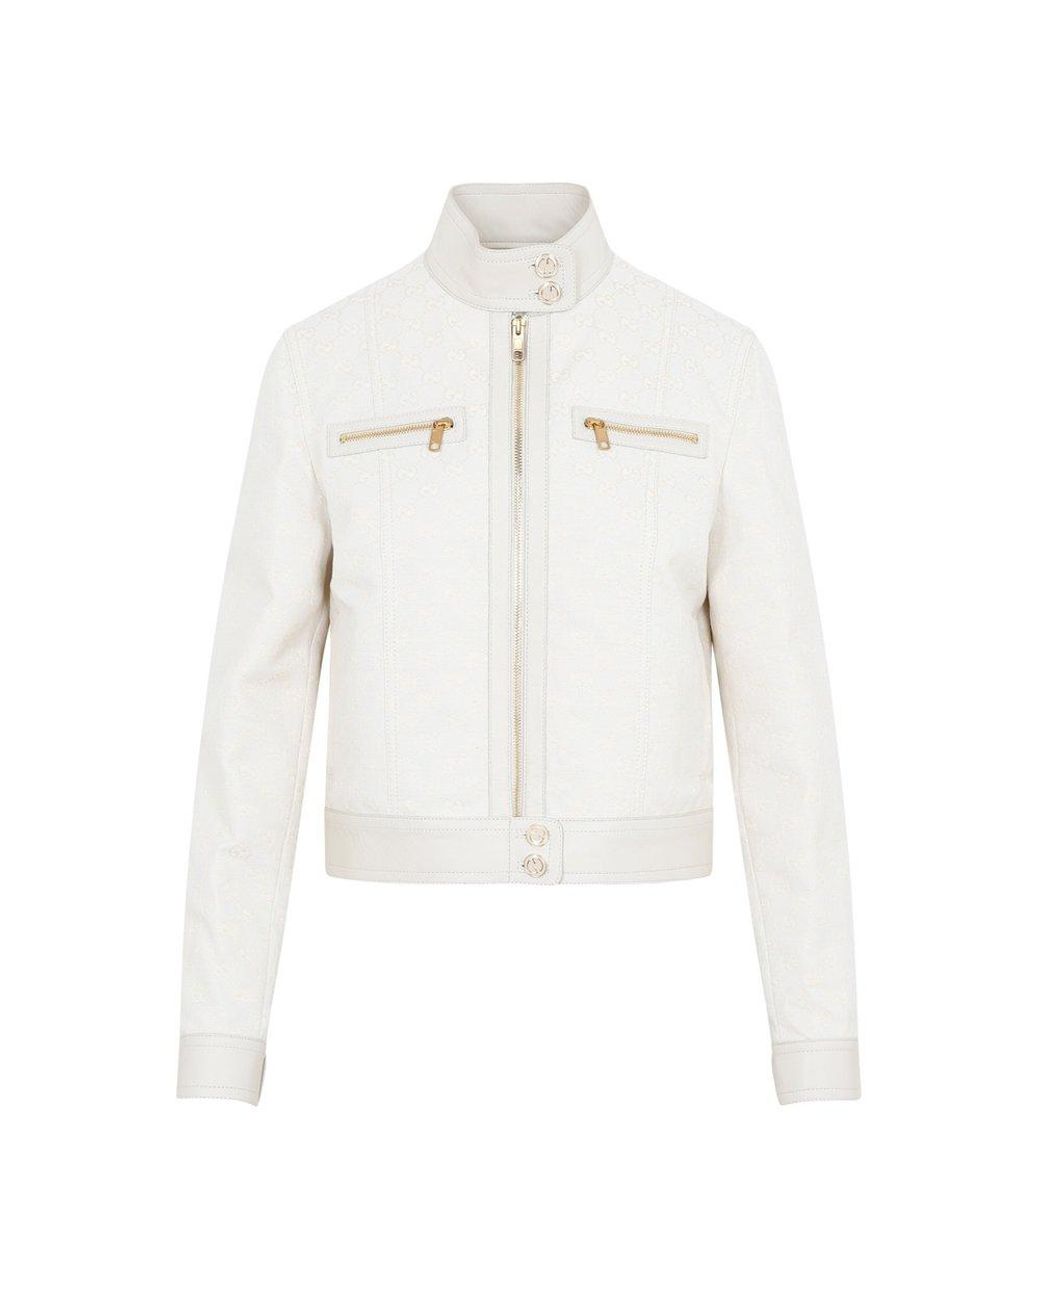 Gucci Highneck Leather Jacket in White | Lyst